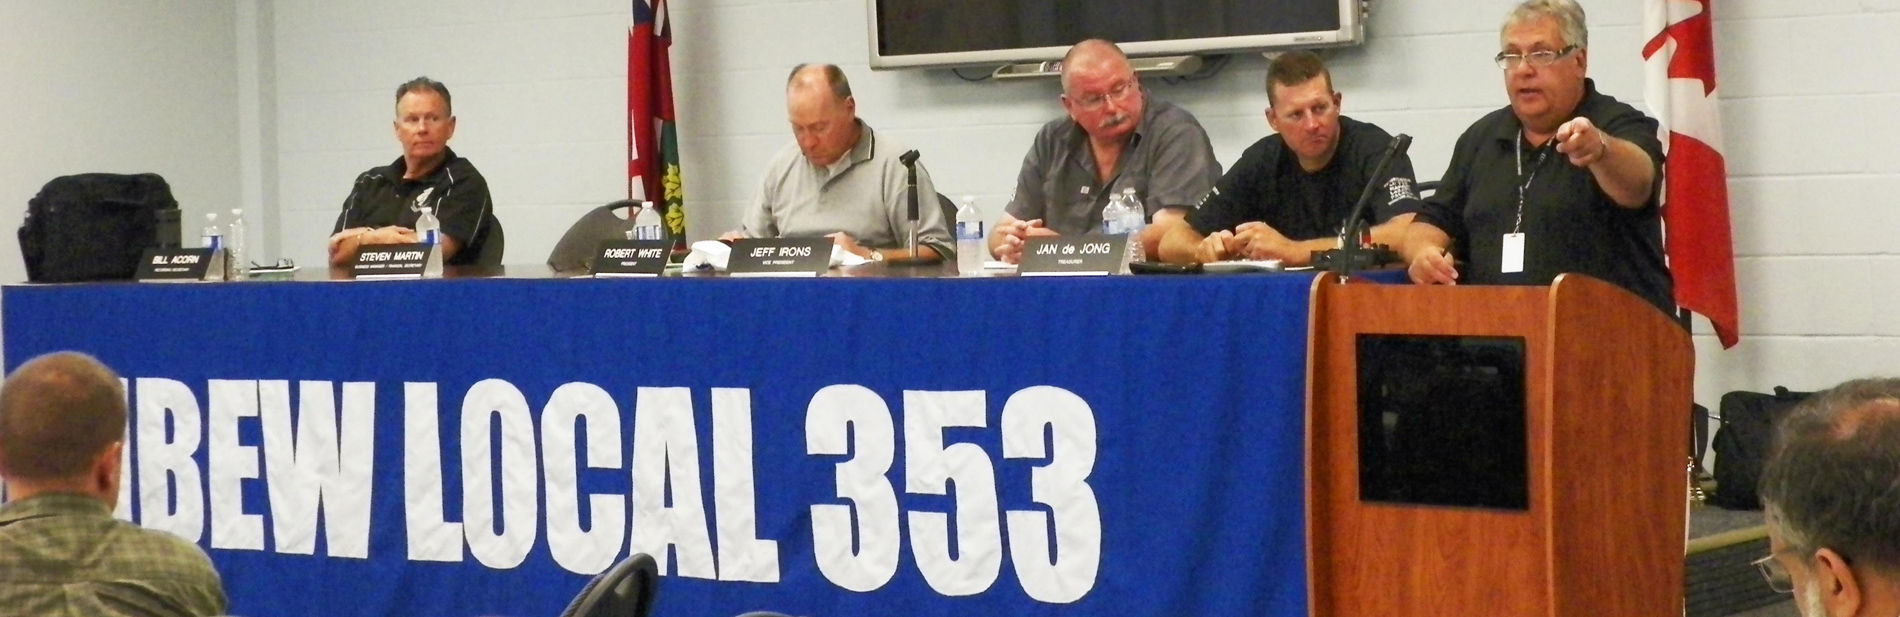 Four IBEW 353 members at a long table and a fifth member at a podium